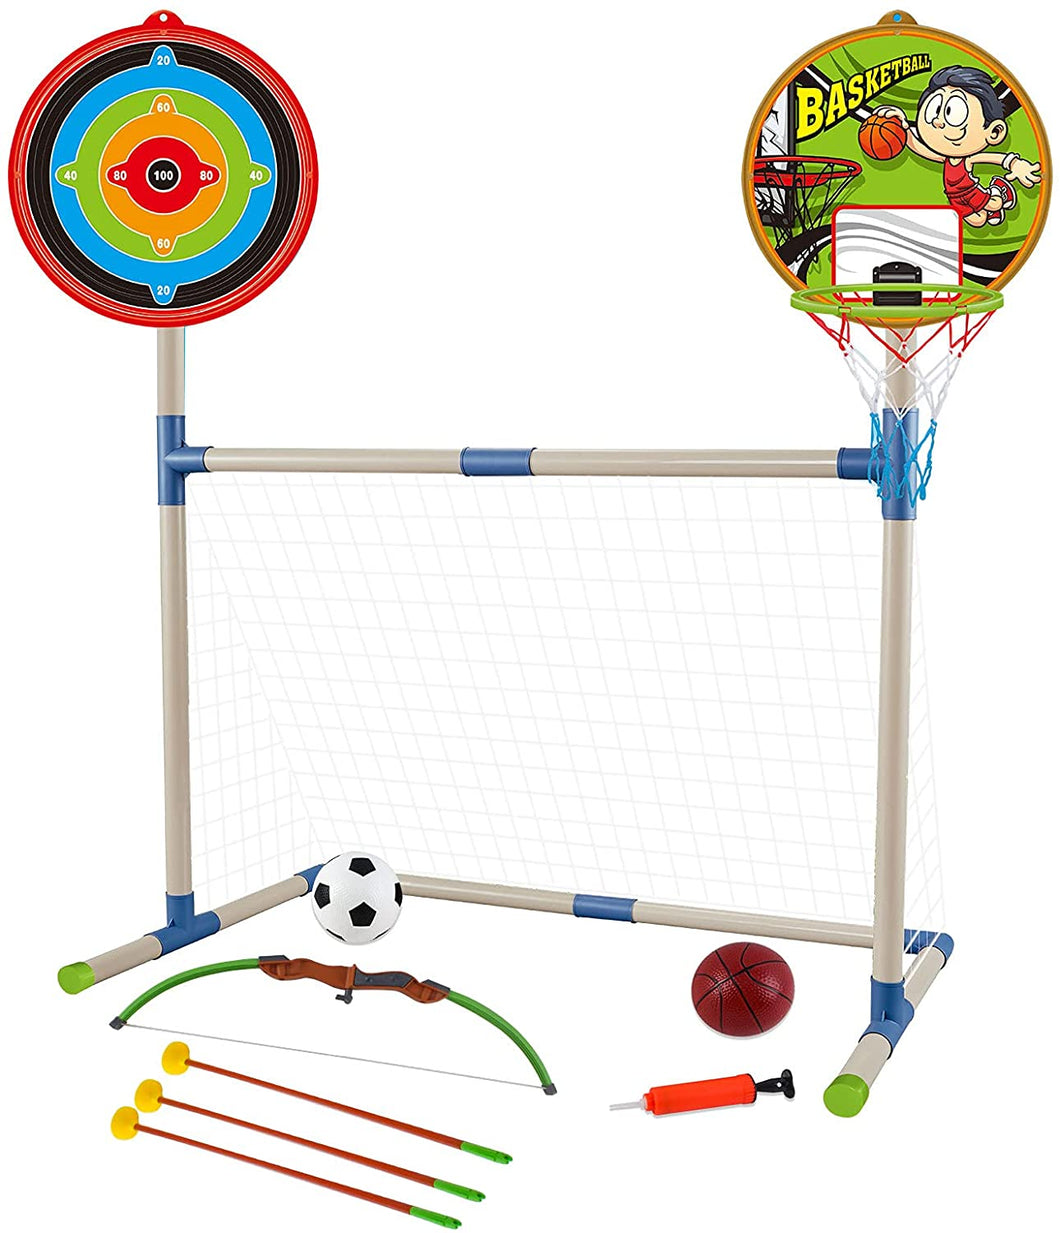 3 IN 1 Outdoor Games Sports Play Set Basketball Football and Archery Set for Kids Indoors Outdoors Great Birthday Christmas Gift-TRS-2